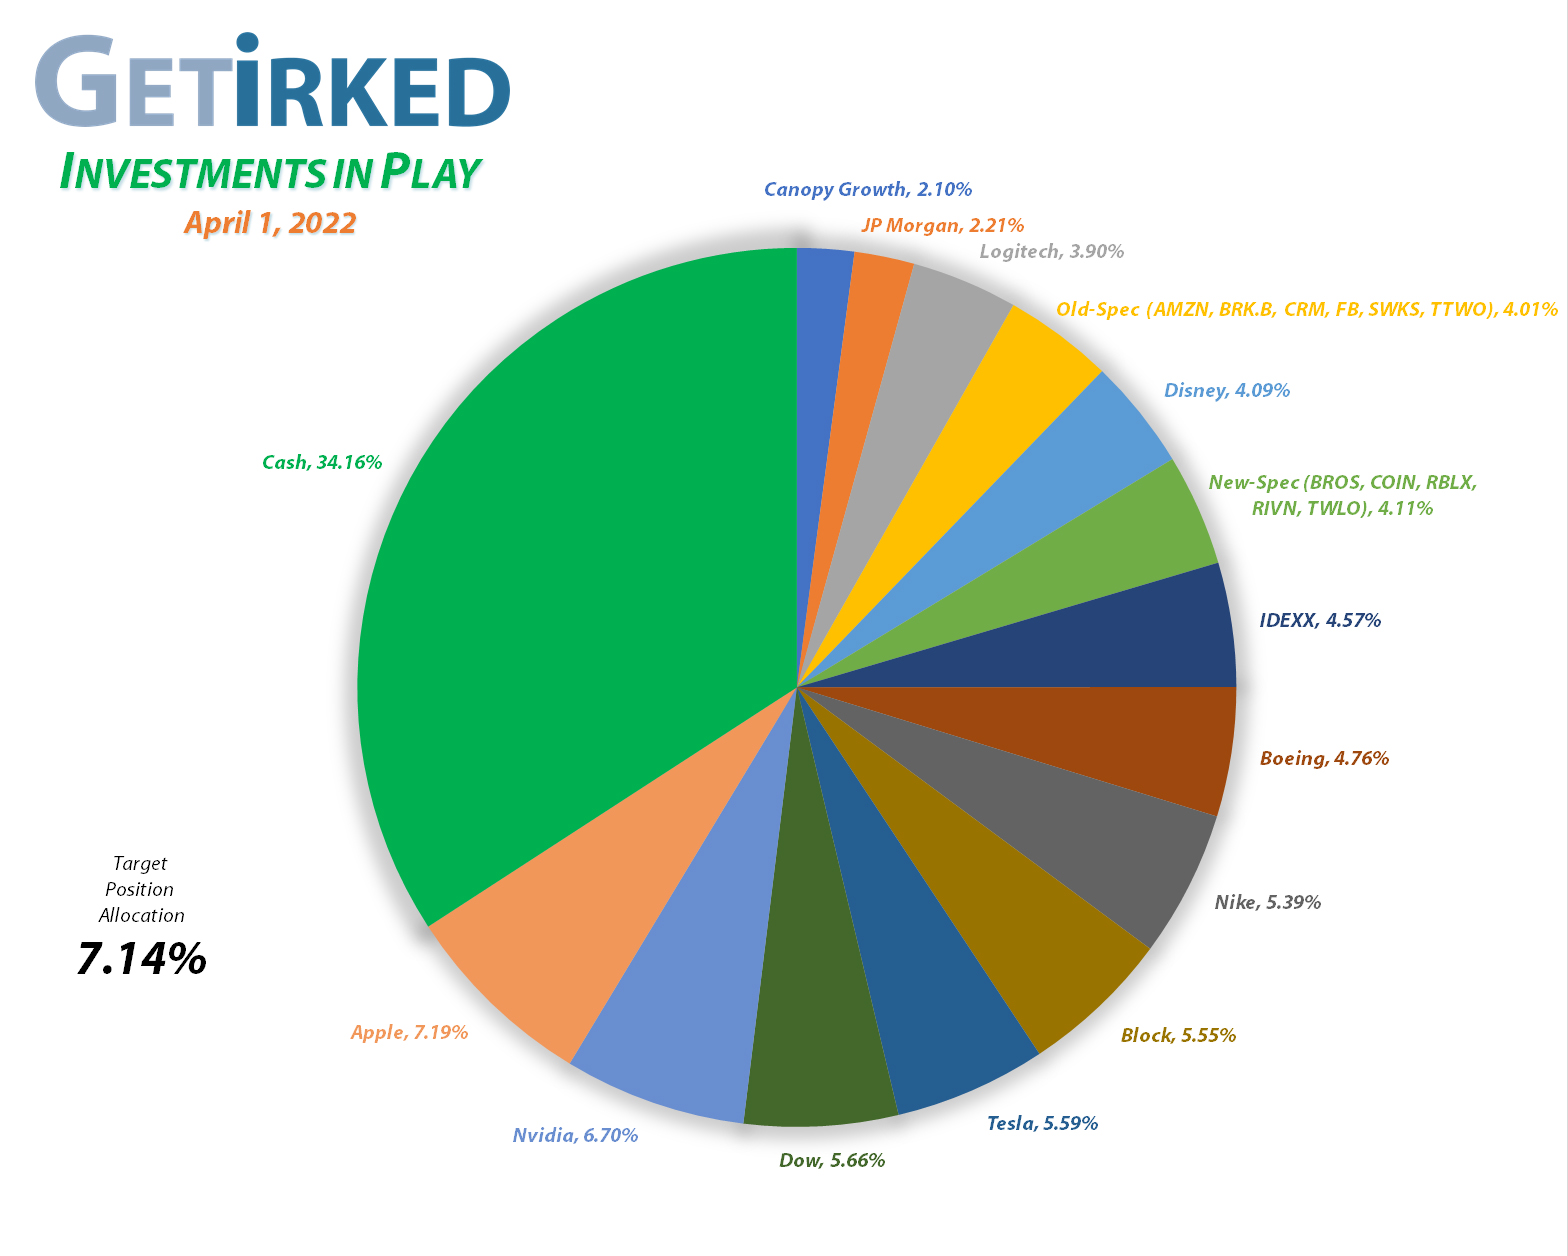 Get Irked - Investments in Play - Current Holdings - March 12, 2021et Irked's Pandemic Portfolio Holdings as of April 1, 2022